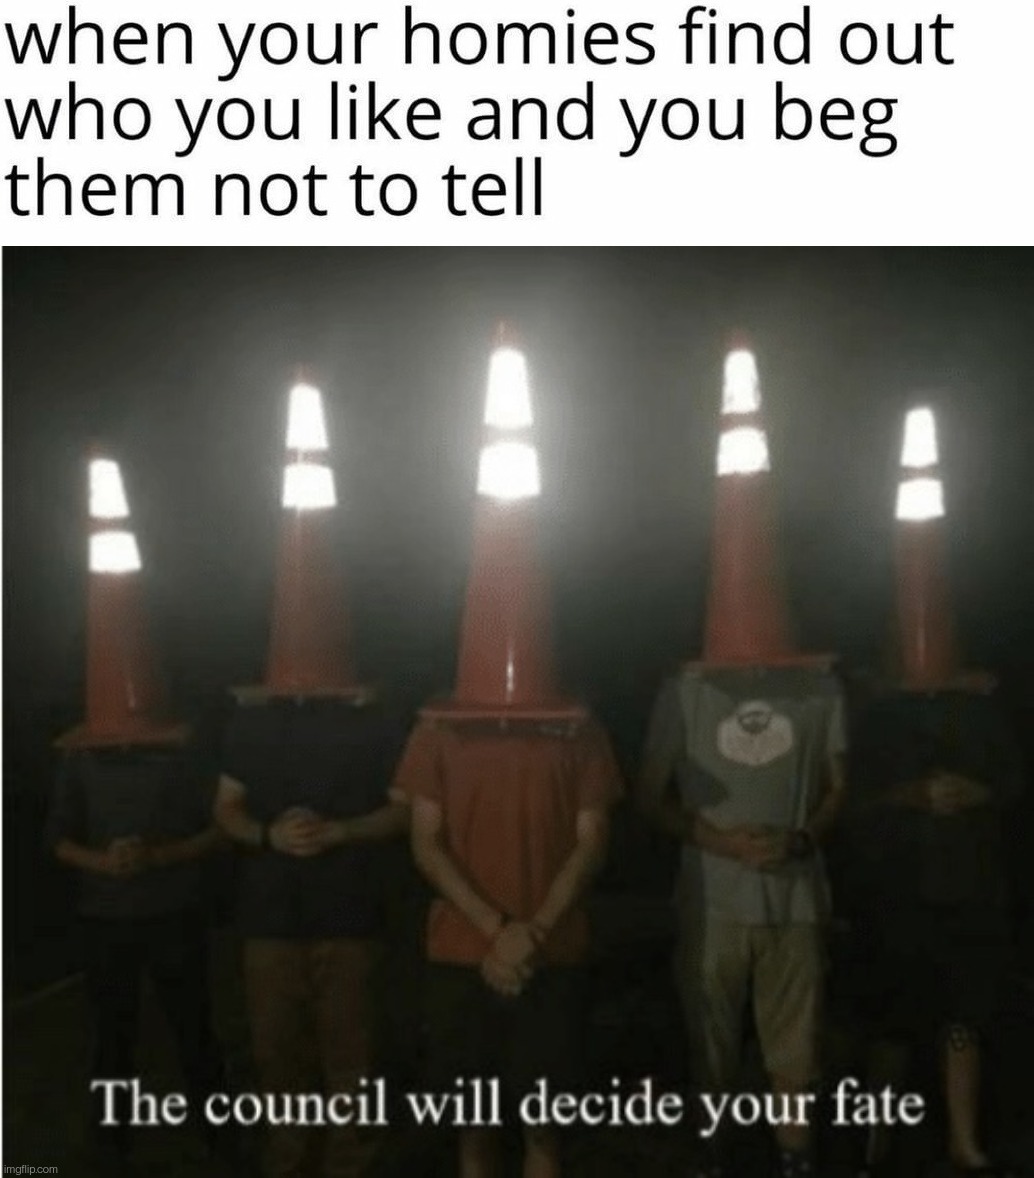 Council's decision. . . | image tagged in the council will decide your fate,homies,funny,memes | made w/ Imgflip meme maker